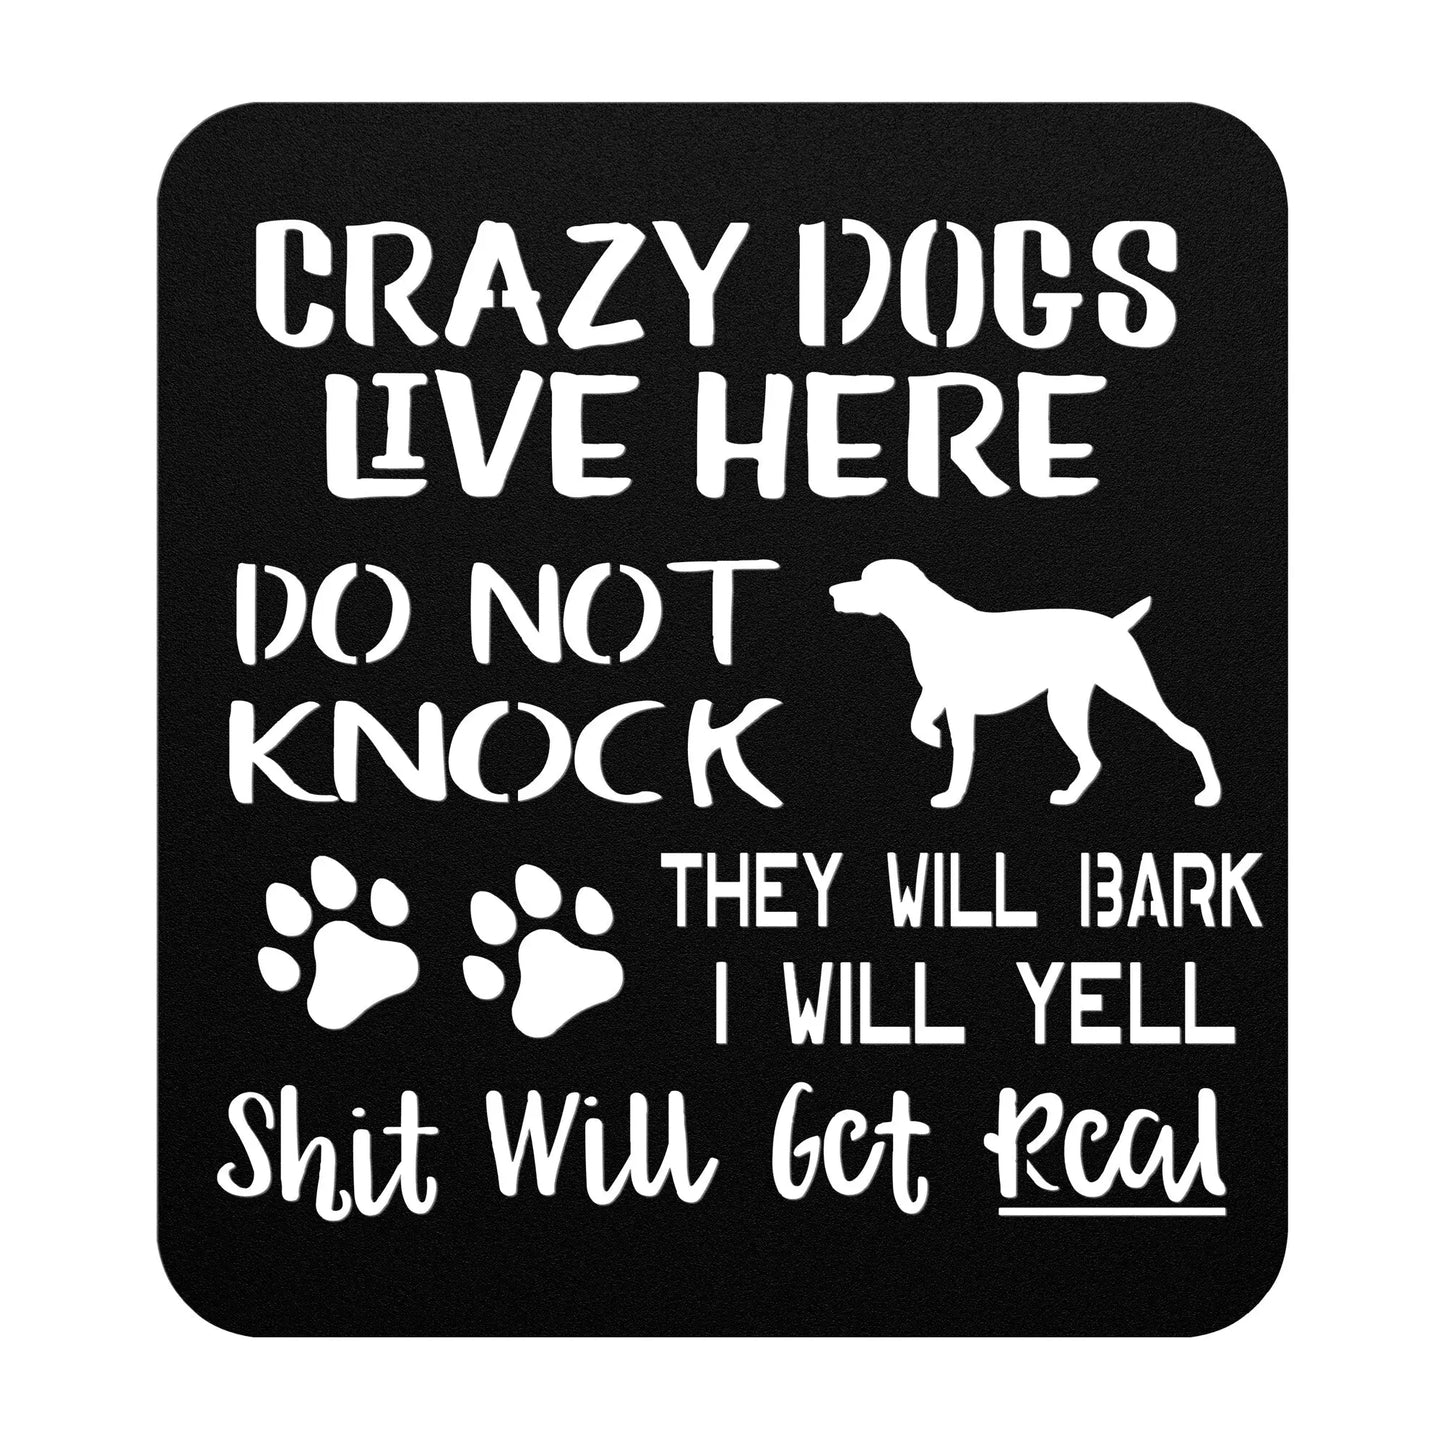 Wall Art Crazy Dogs Live Here Metal Sign; Wall Decor for Home and Office teelaunch